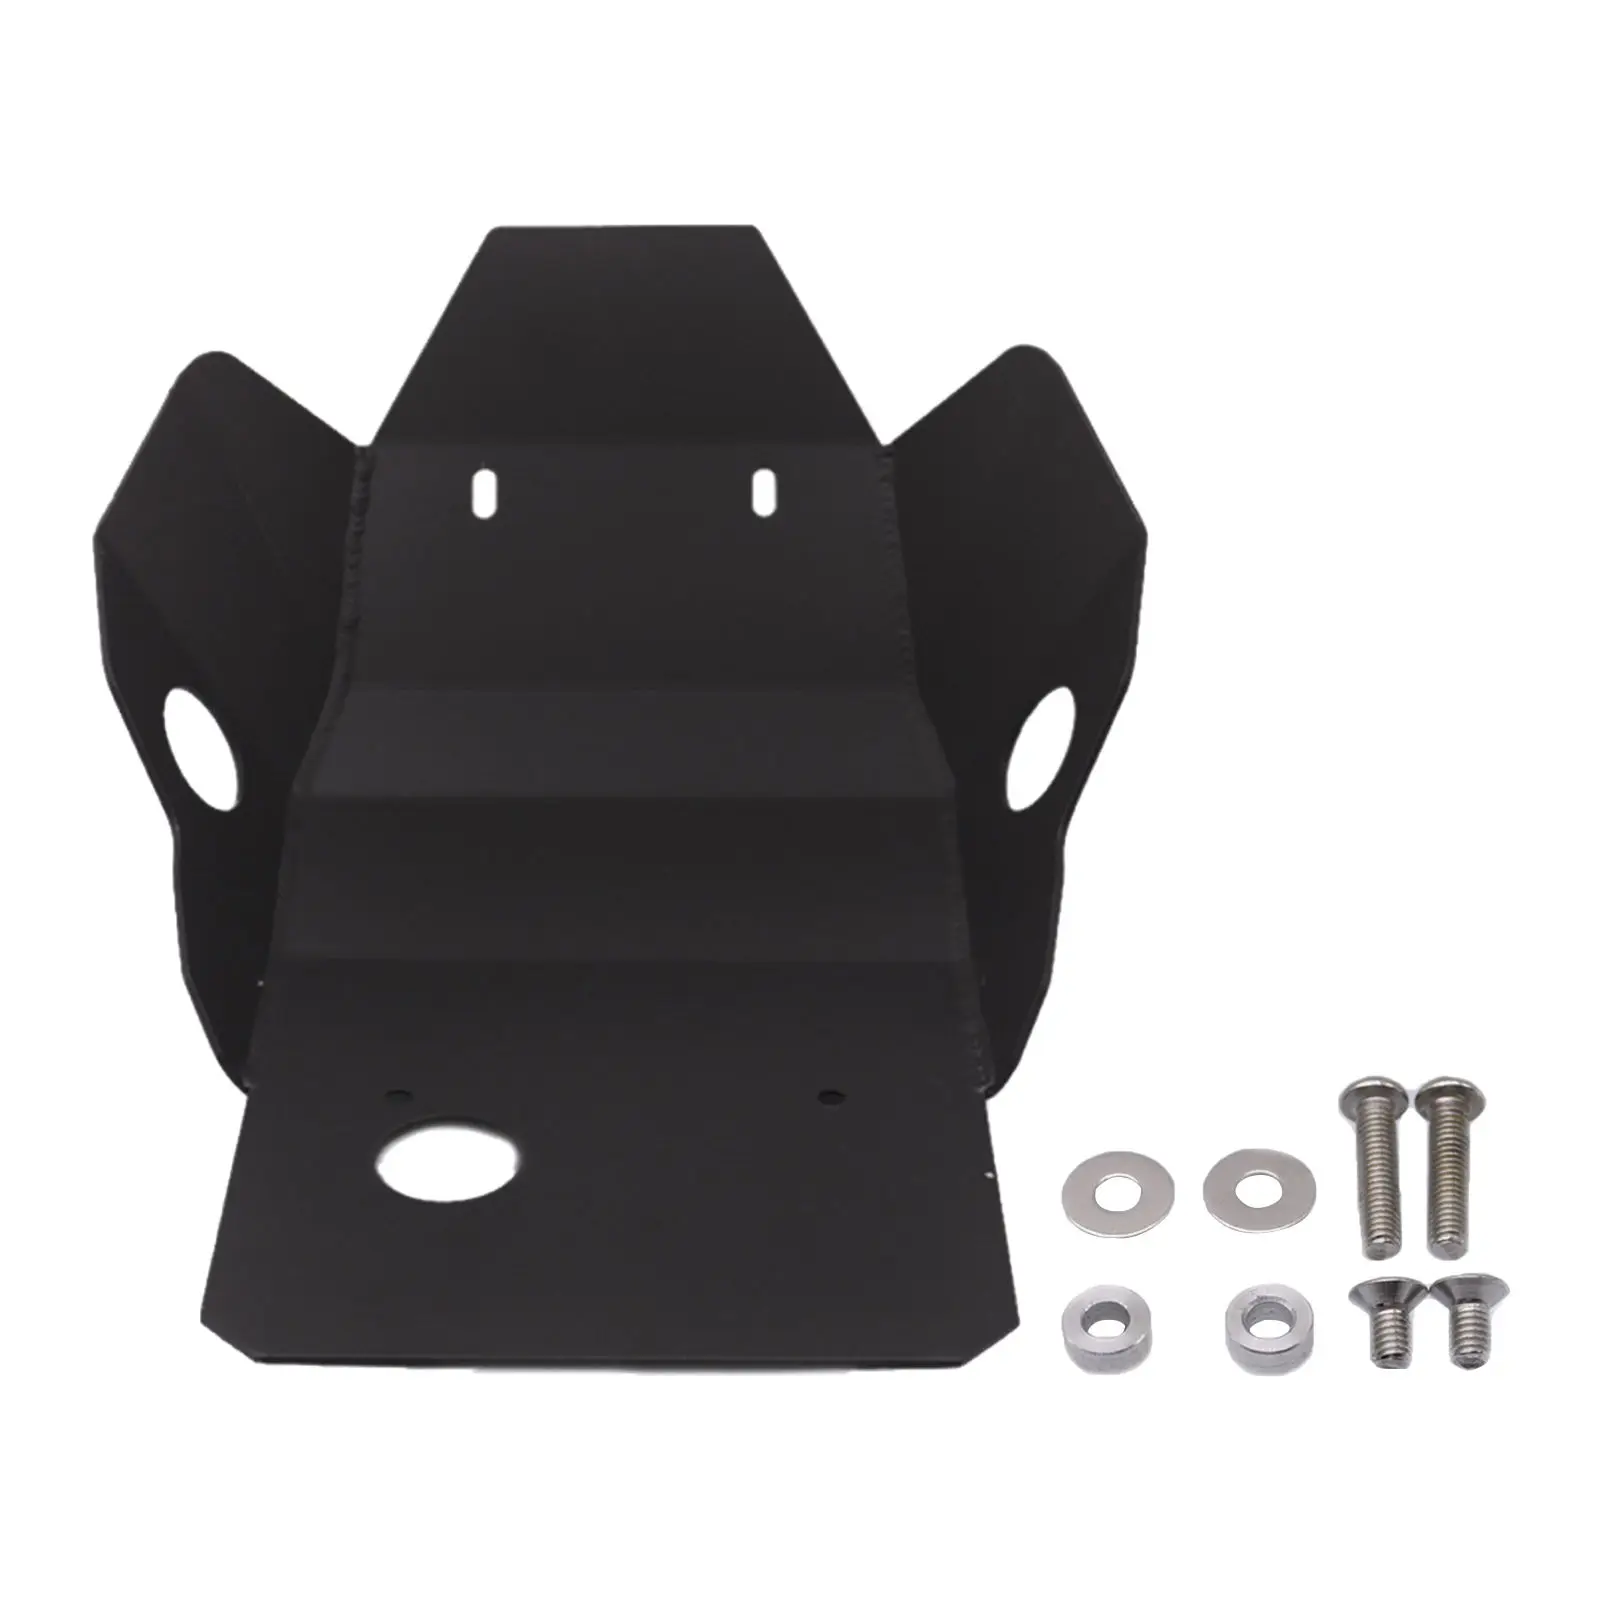 Engine Guard Protection Cover Bottom Skid Plate for Yamaha WR250R 2008-2019 Replacement Accessories